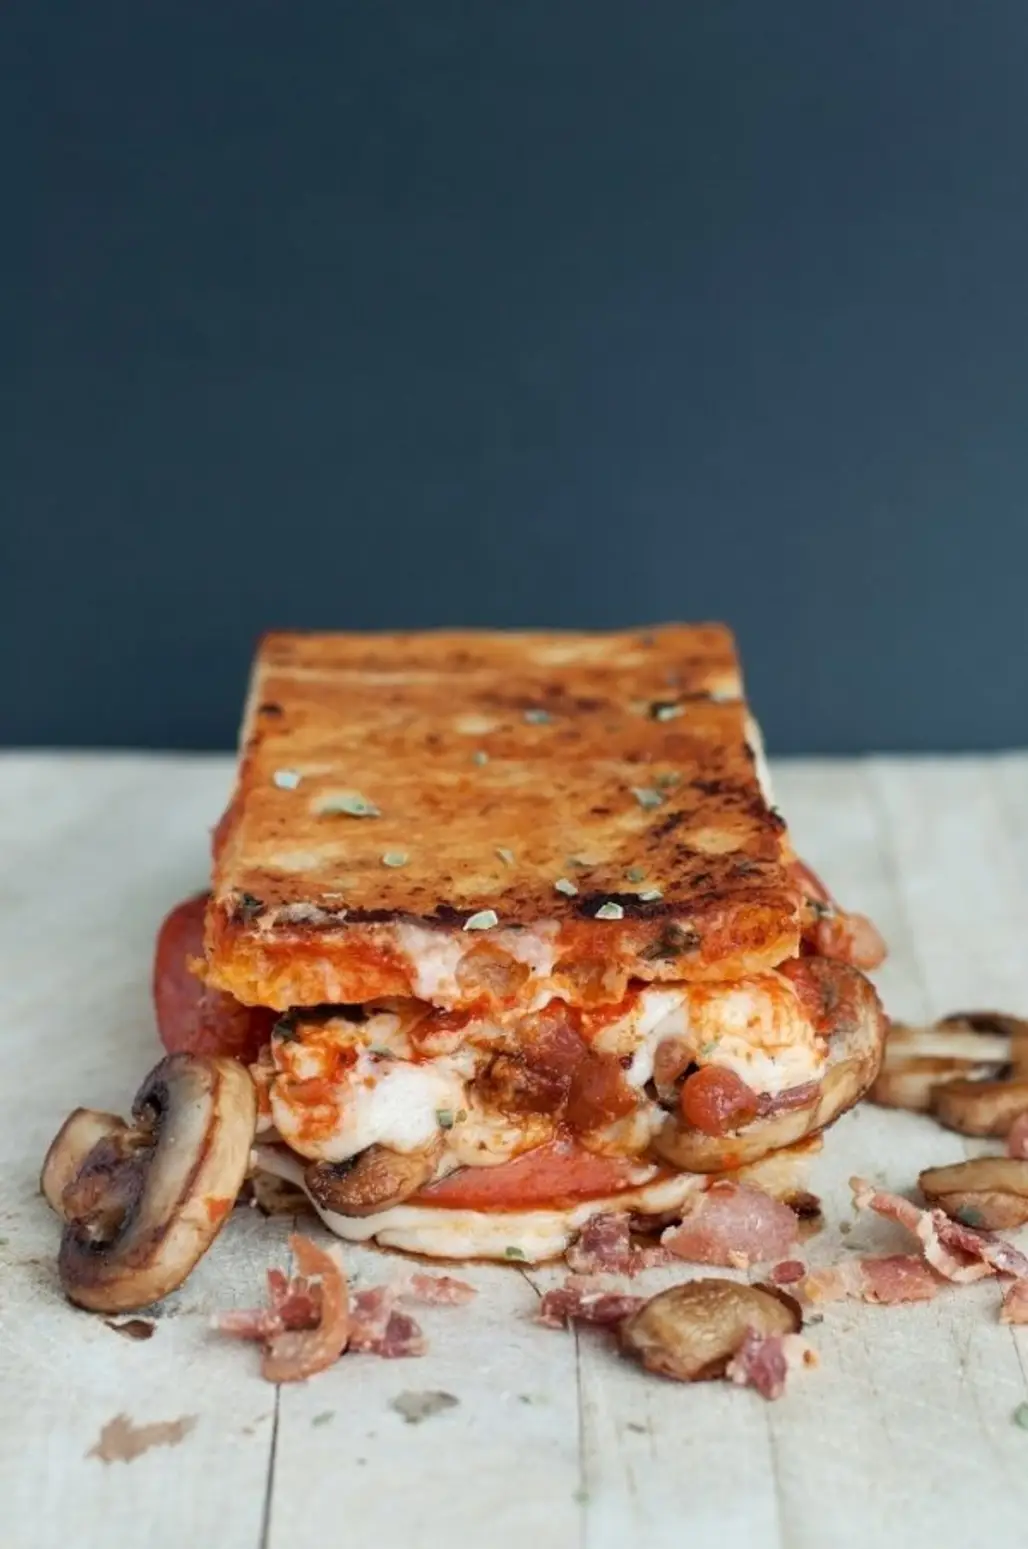 The Canadian Pizza Grilled Cheese